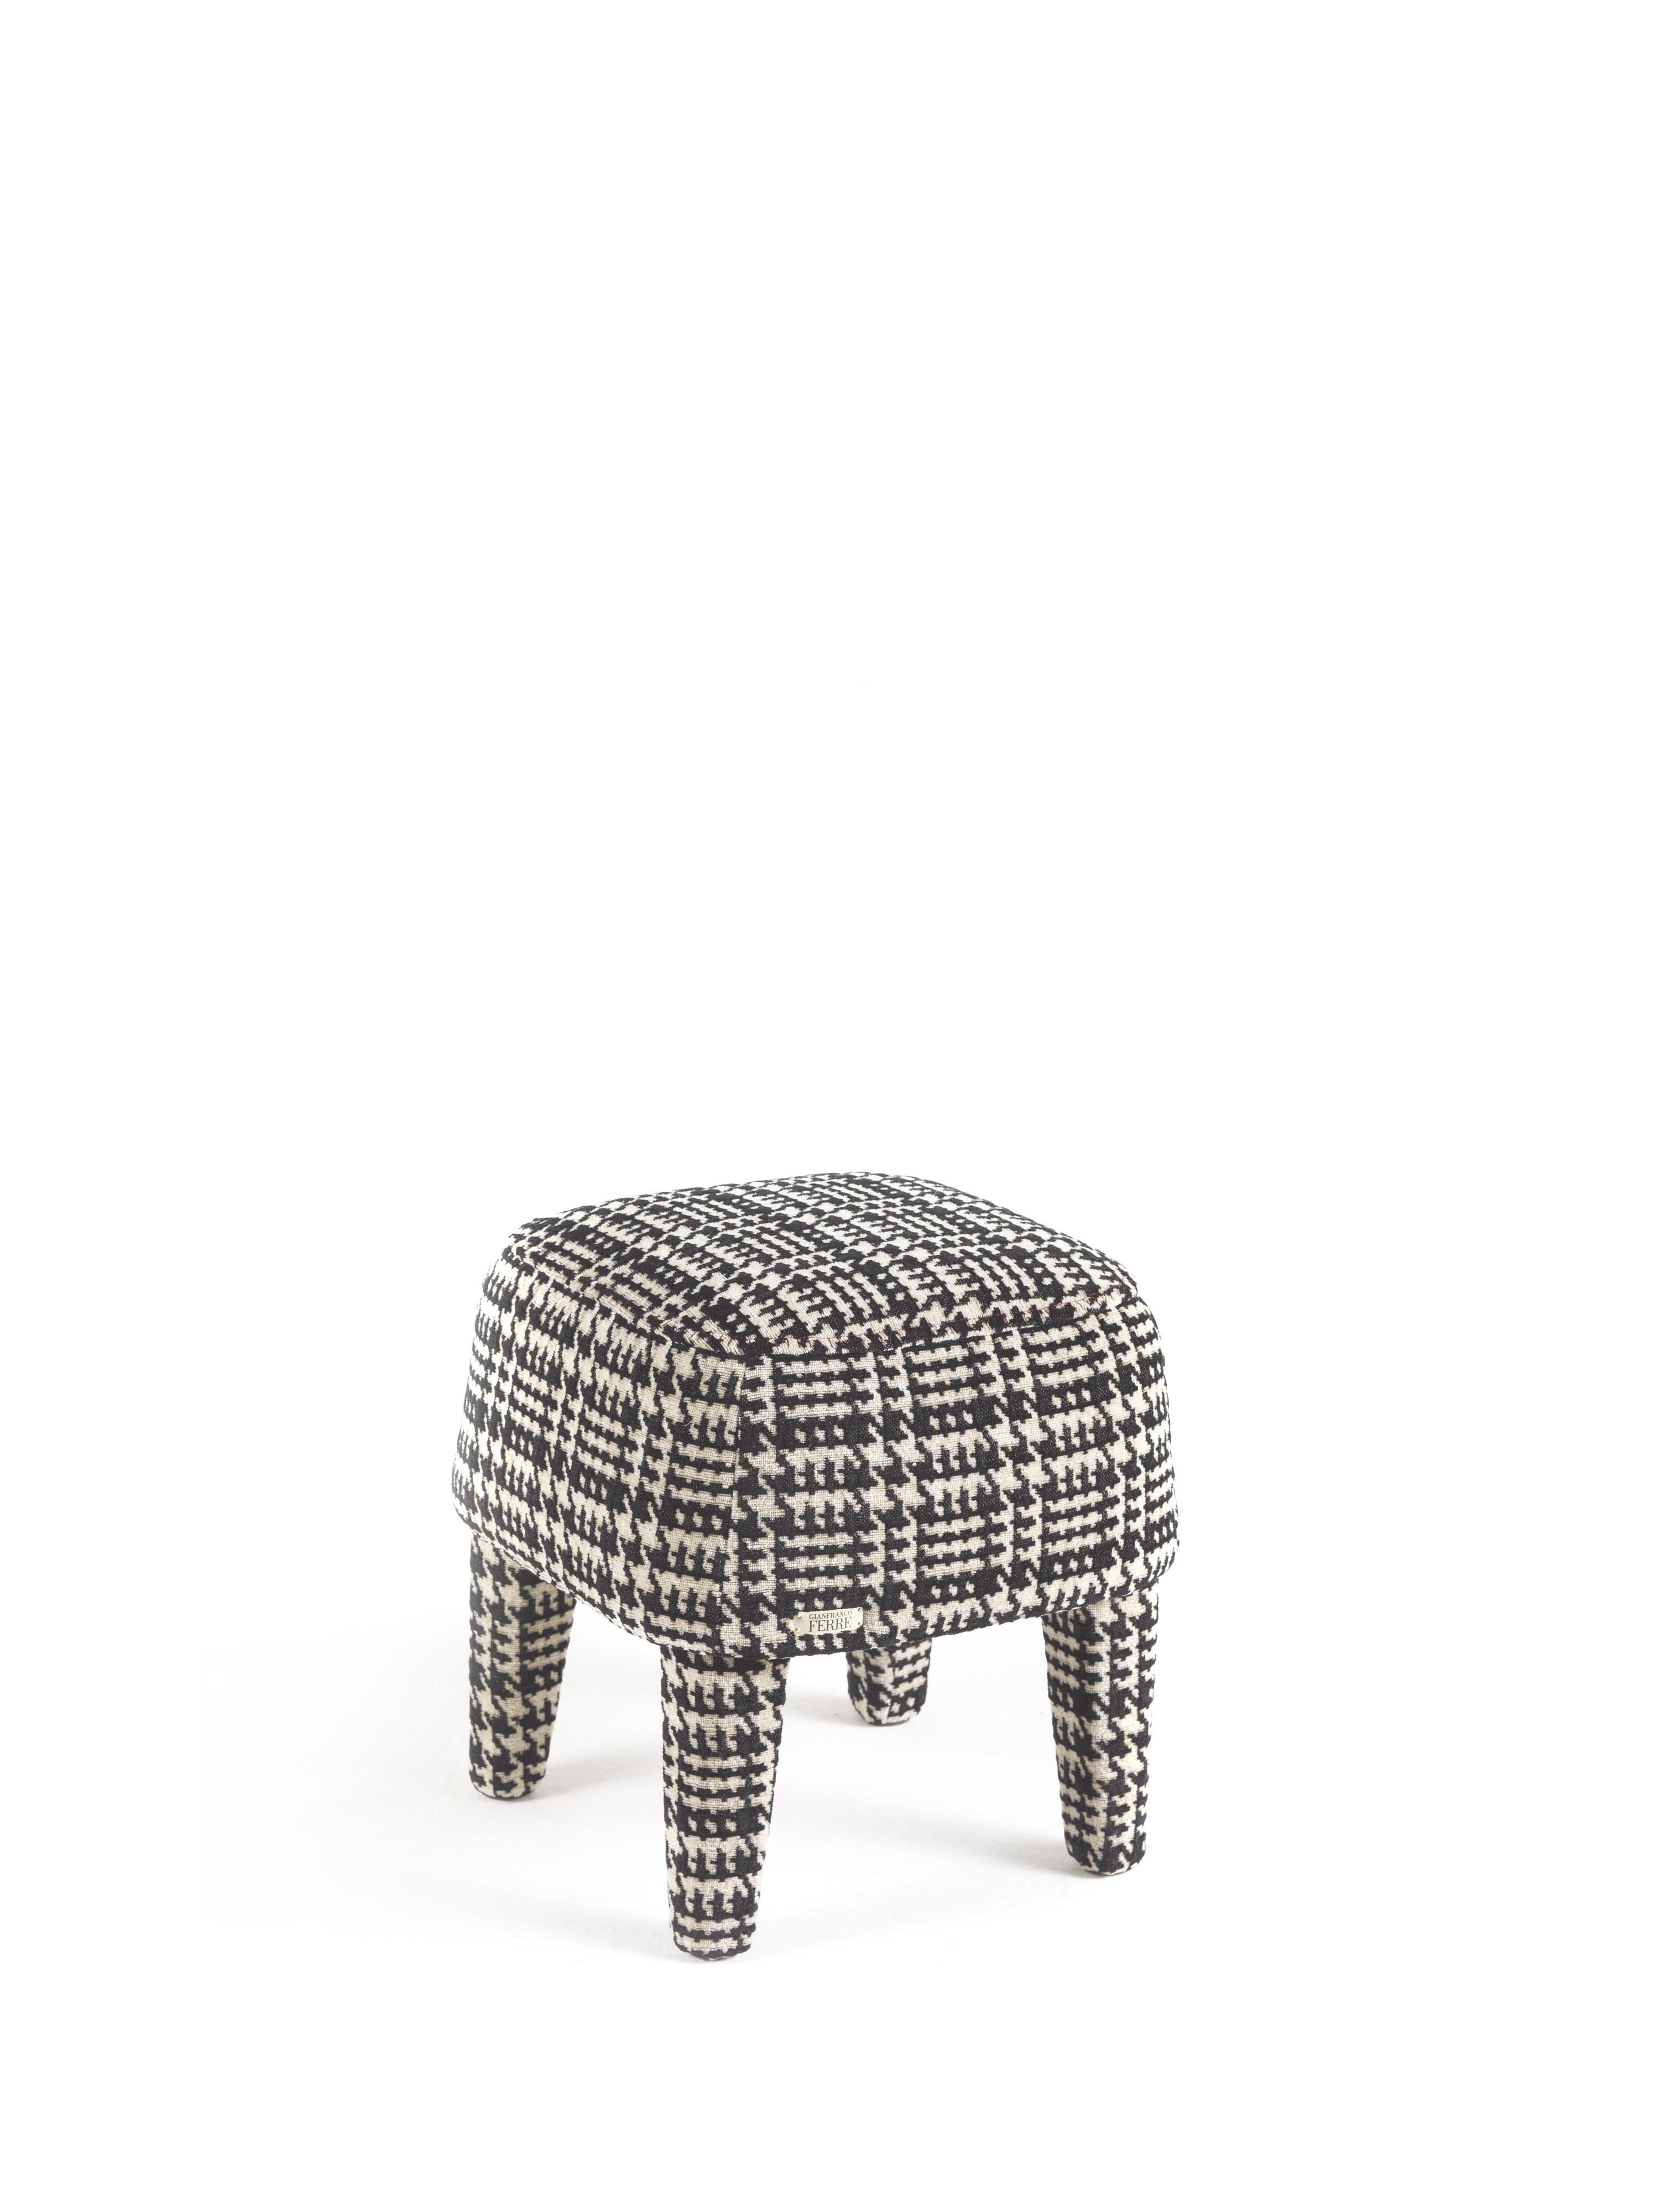 The Mini pouf features a light and versatile design. Small, soft and compact, it adds character to any setting. Available in different menswear fabrics of the collection: pied-de-poule, pinstripe, twill, Prince of Wales.
Mini pouf with the structure